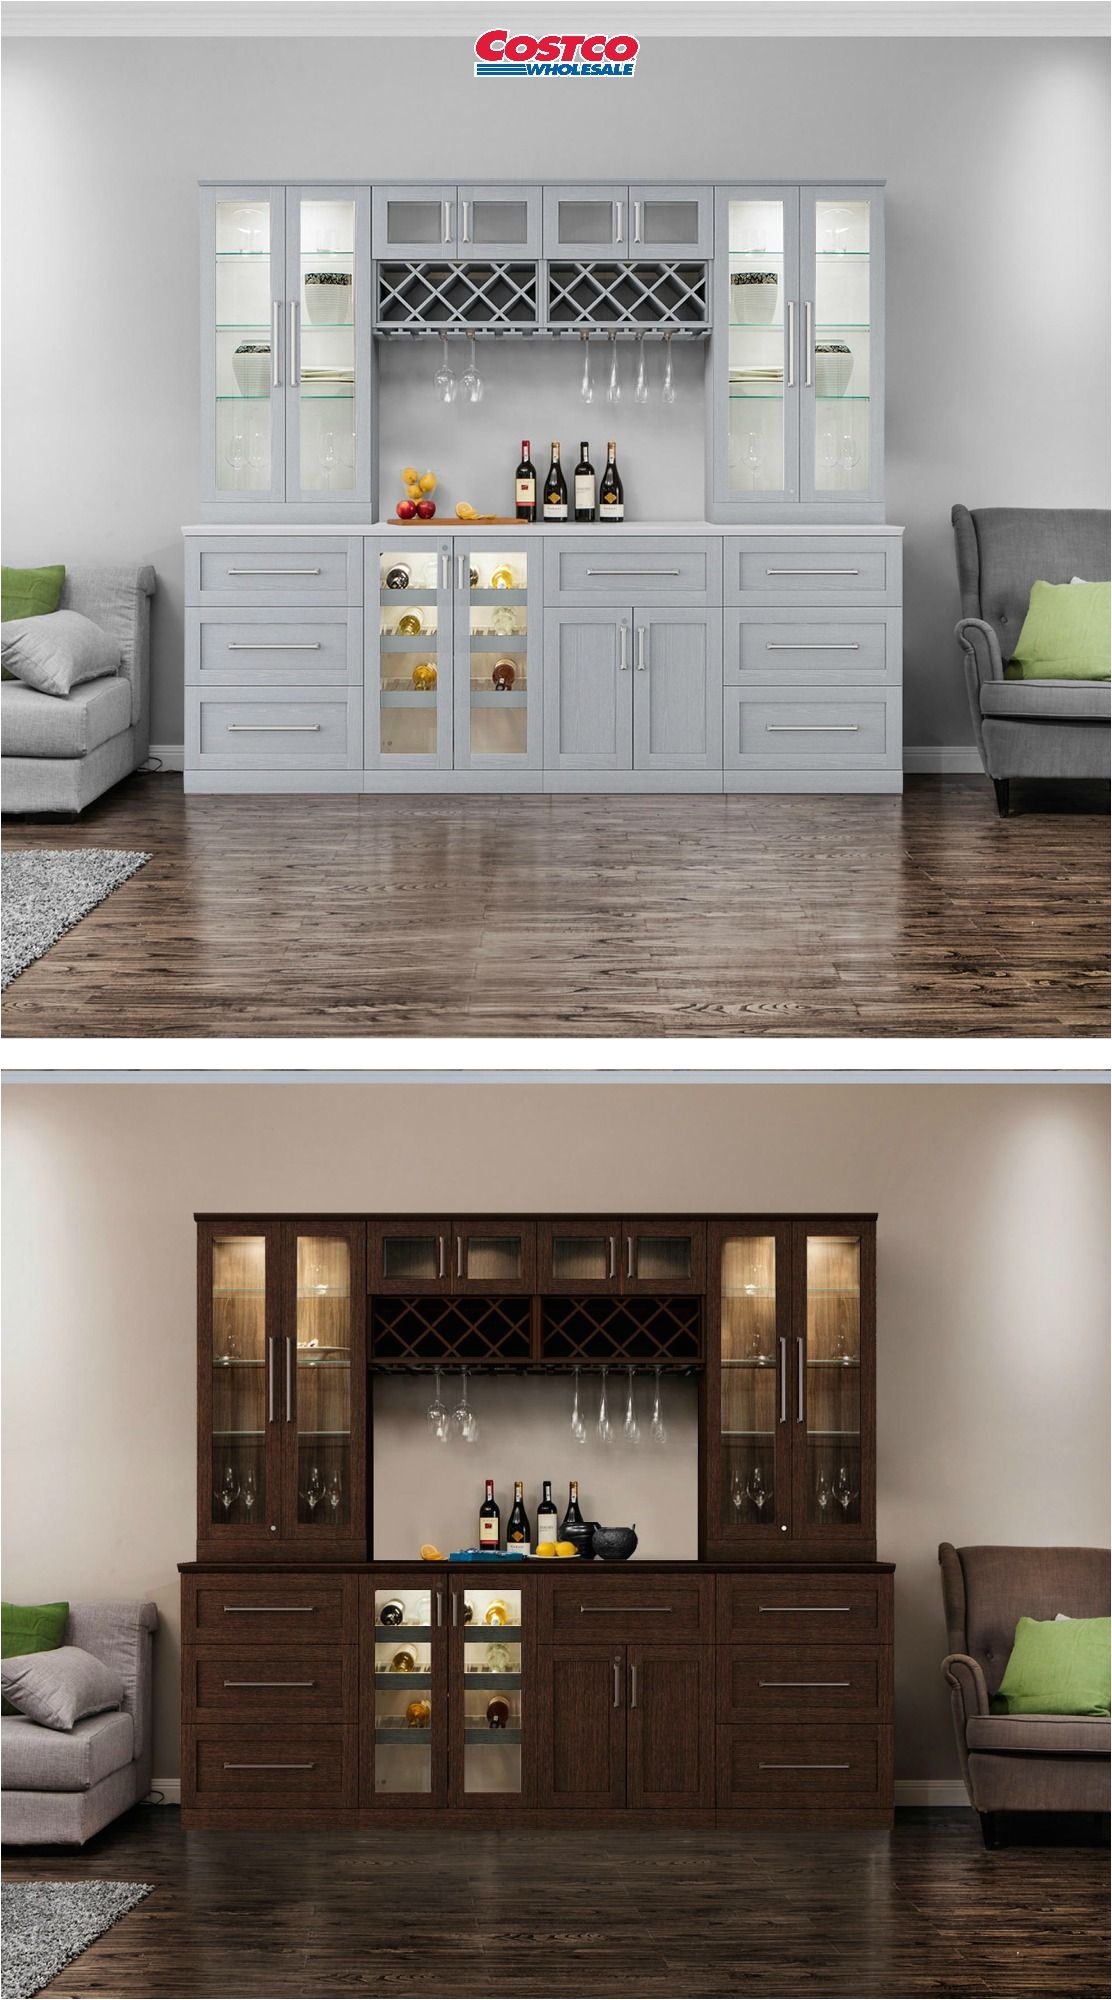 Costco Wine Cellar Racks Home Wine Bar 9 Piece Cabinetry Set by Newage Products with Three